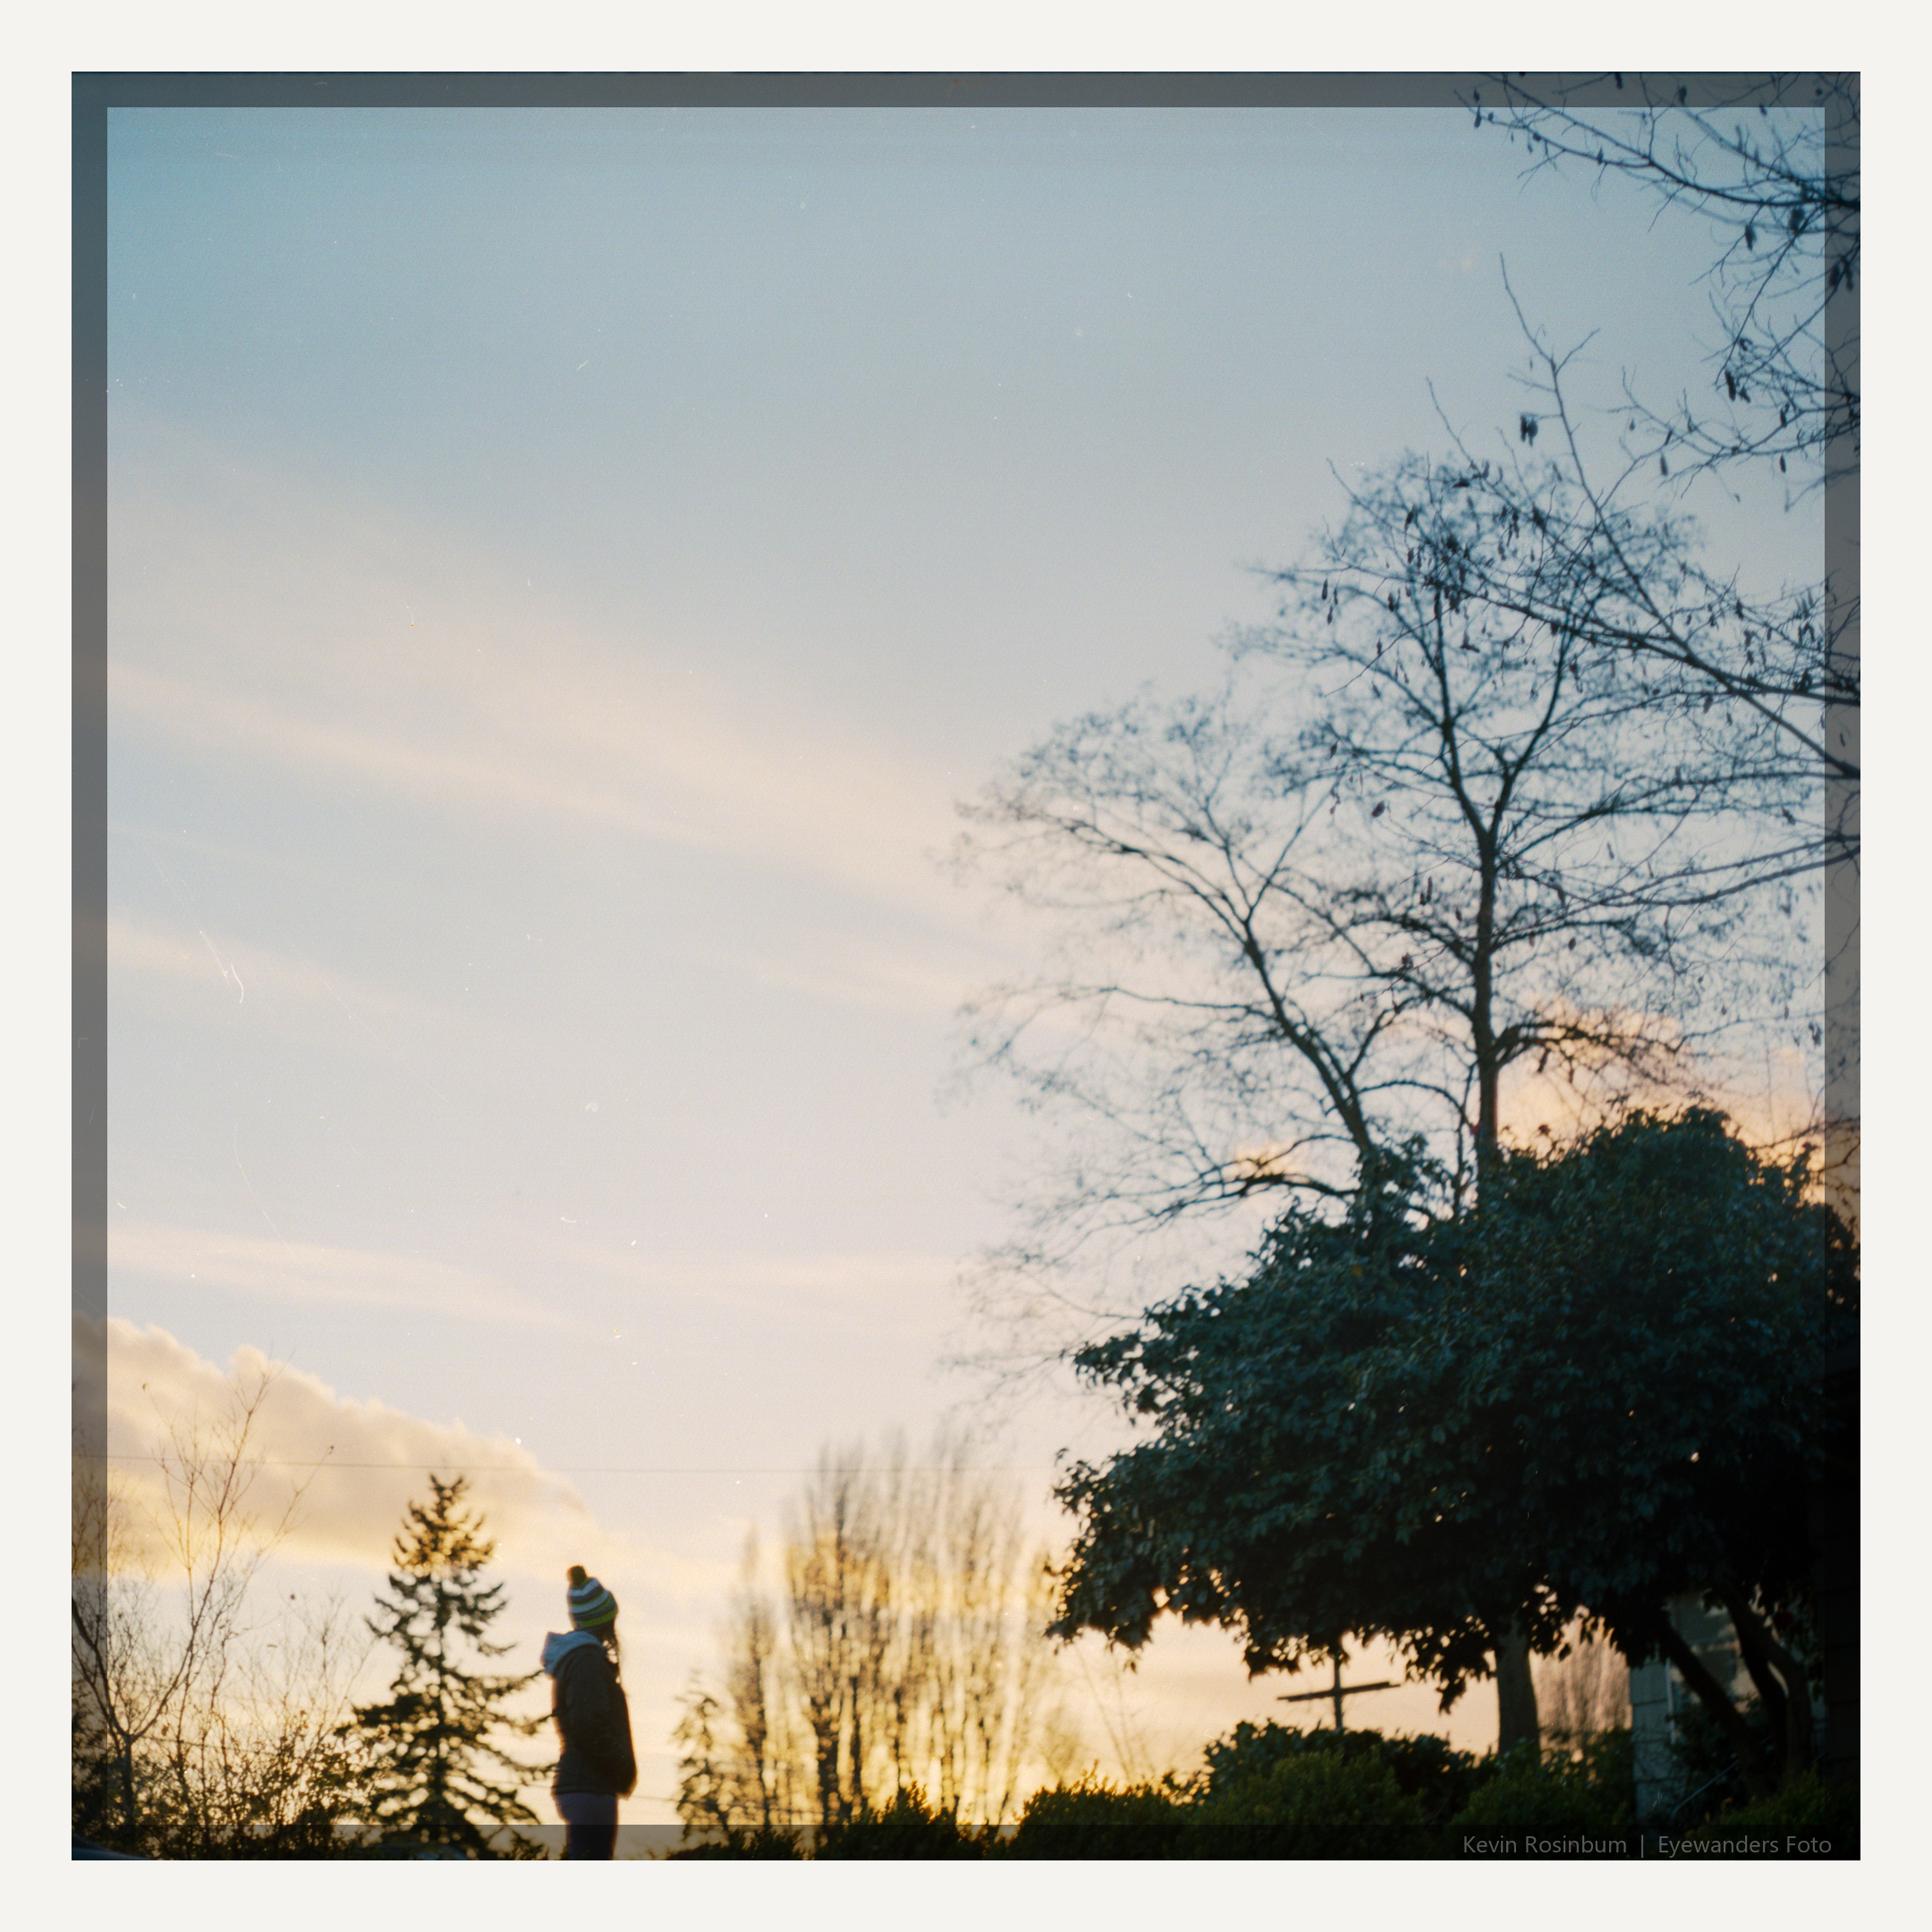 This Chill That Lingers This Warmth That Whispers | Pentacon Six TL | Biometar 80mm Portra 400 | Kevin Rosinbum